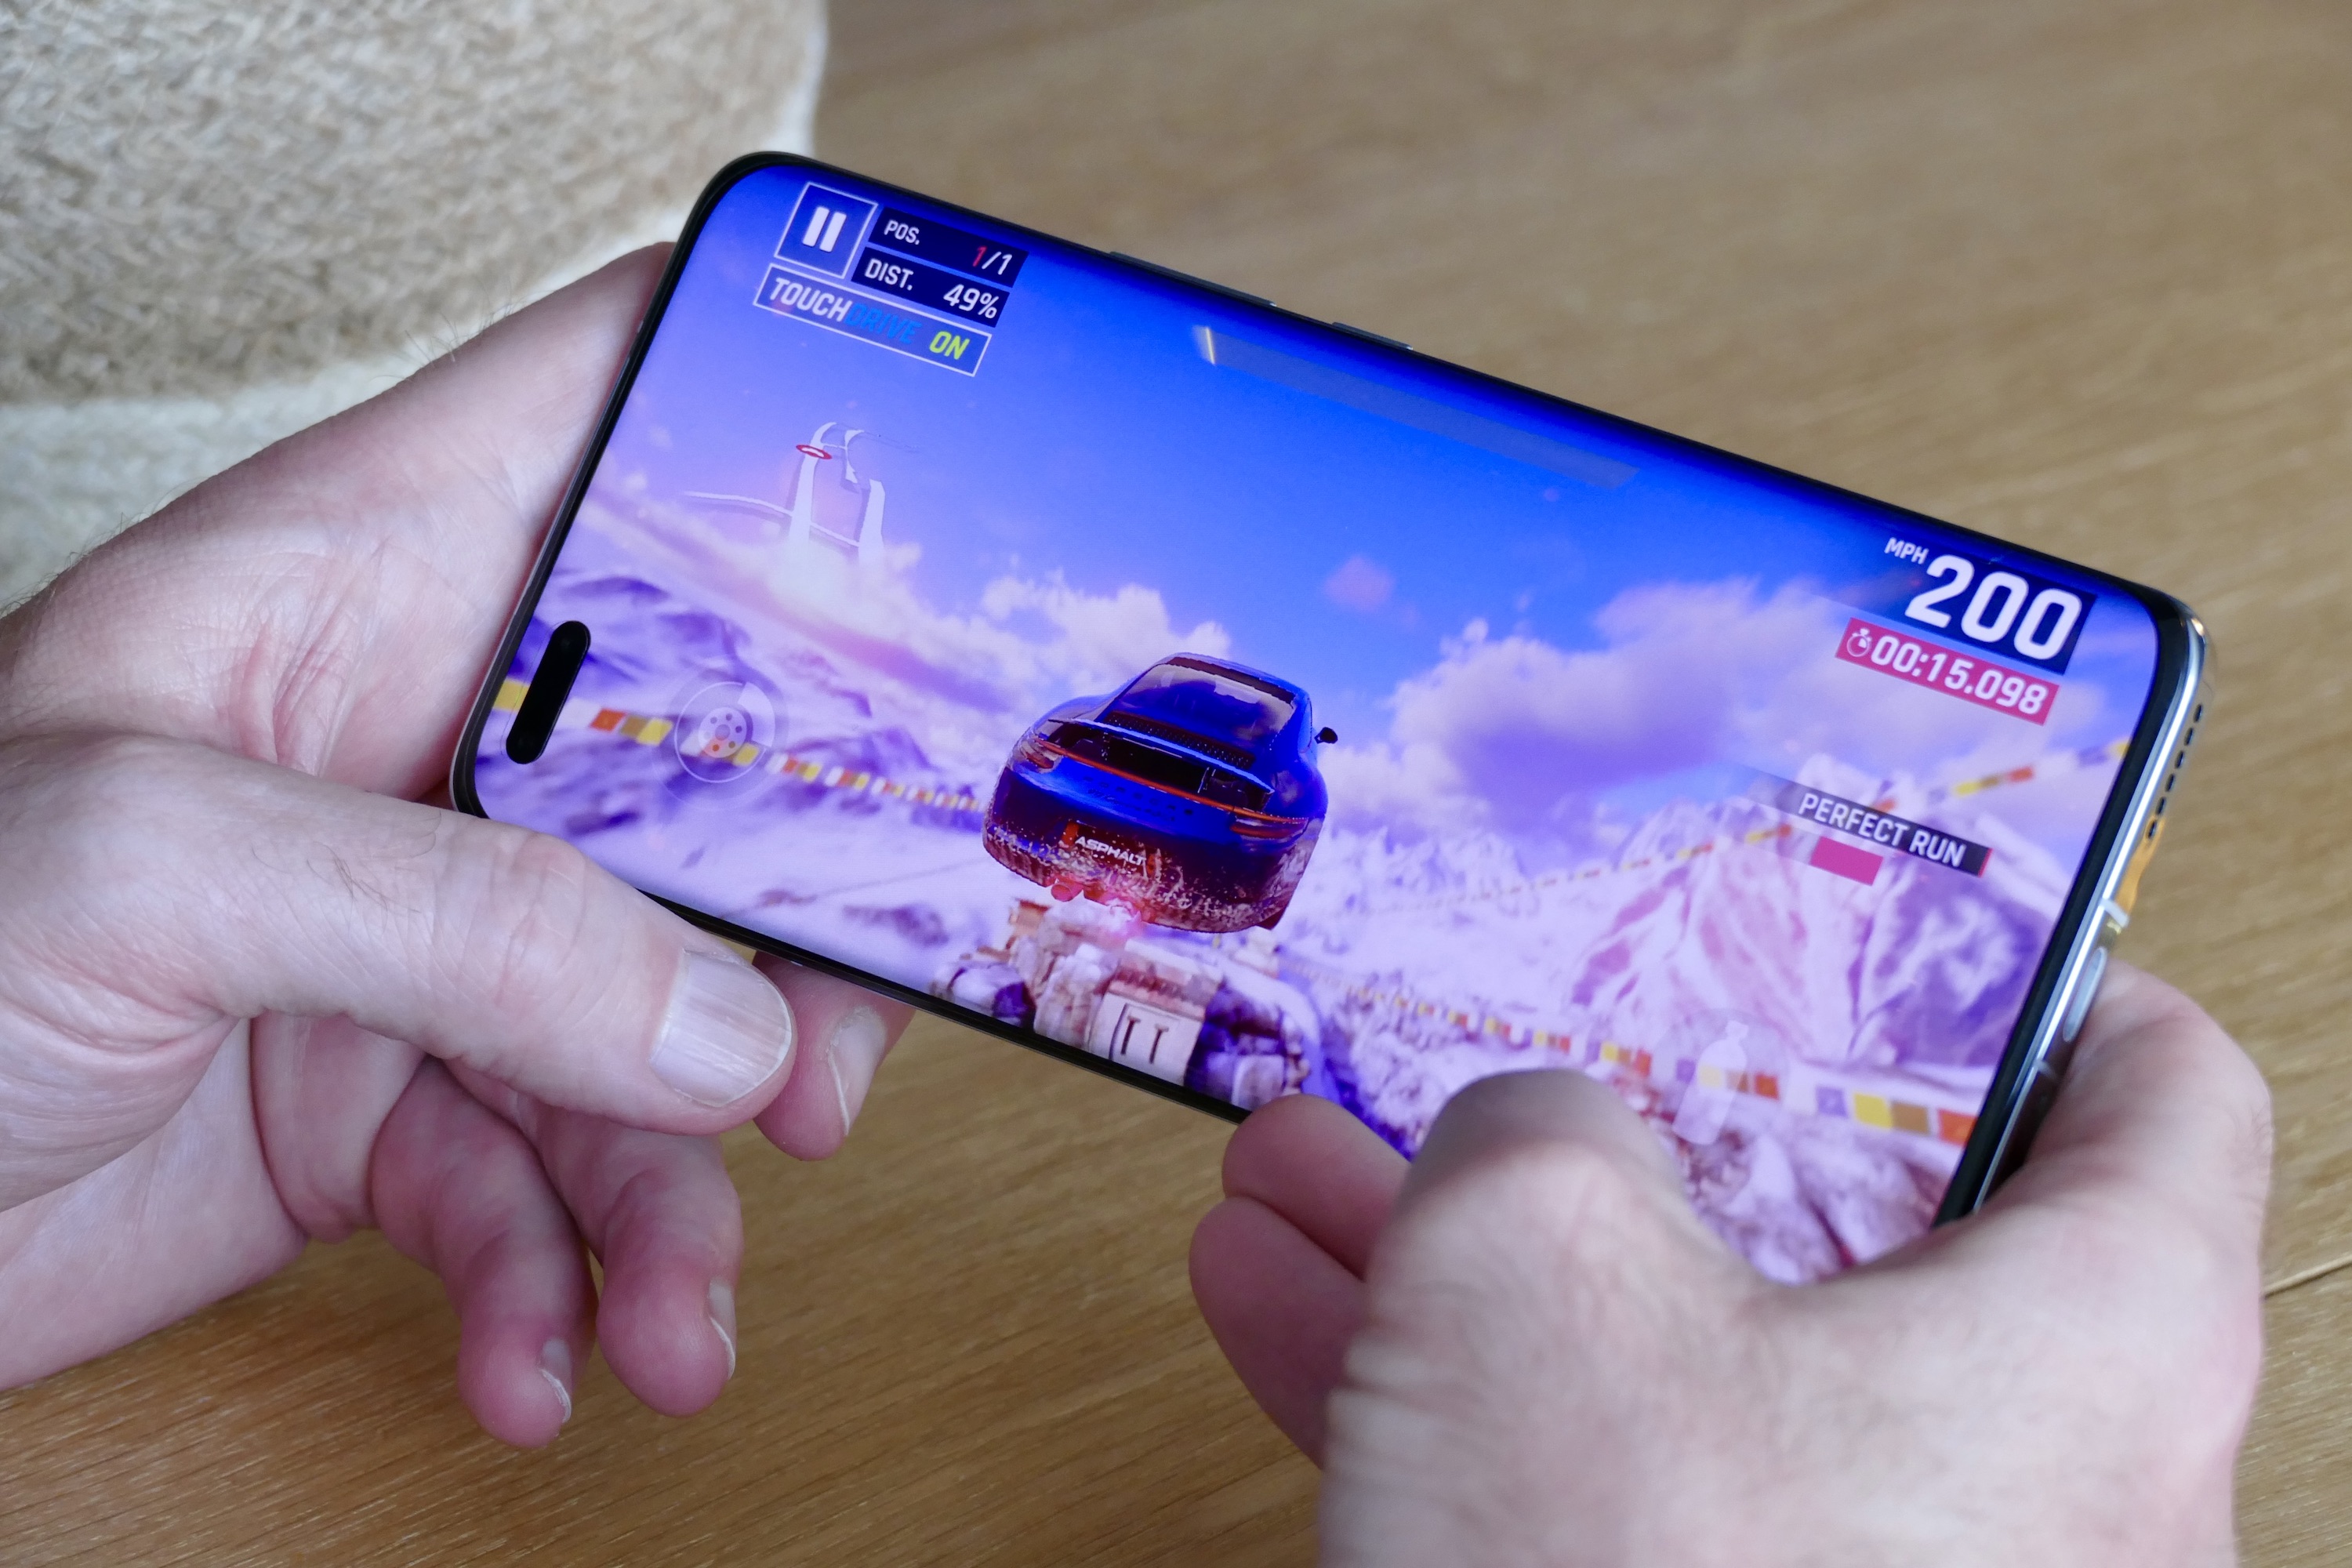 Playing Asphalt 9: Legends on the Honor Magic4 Pro.